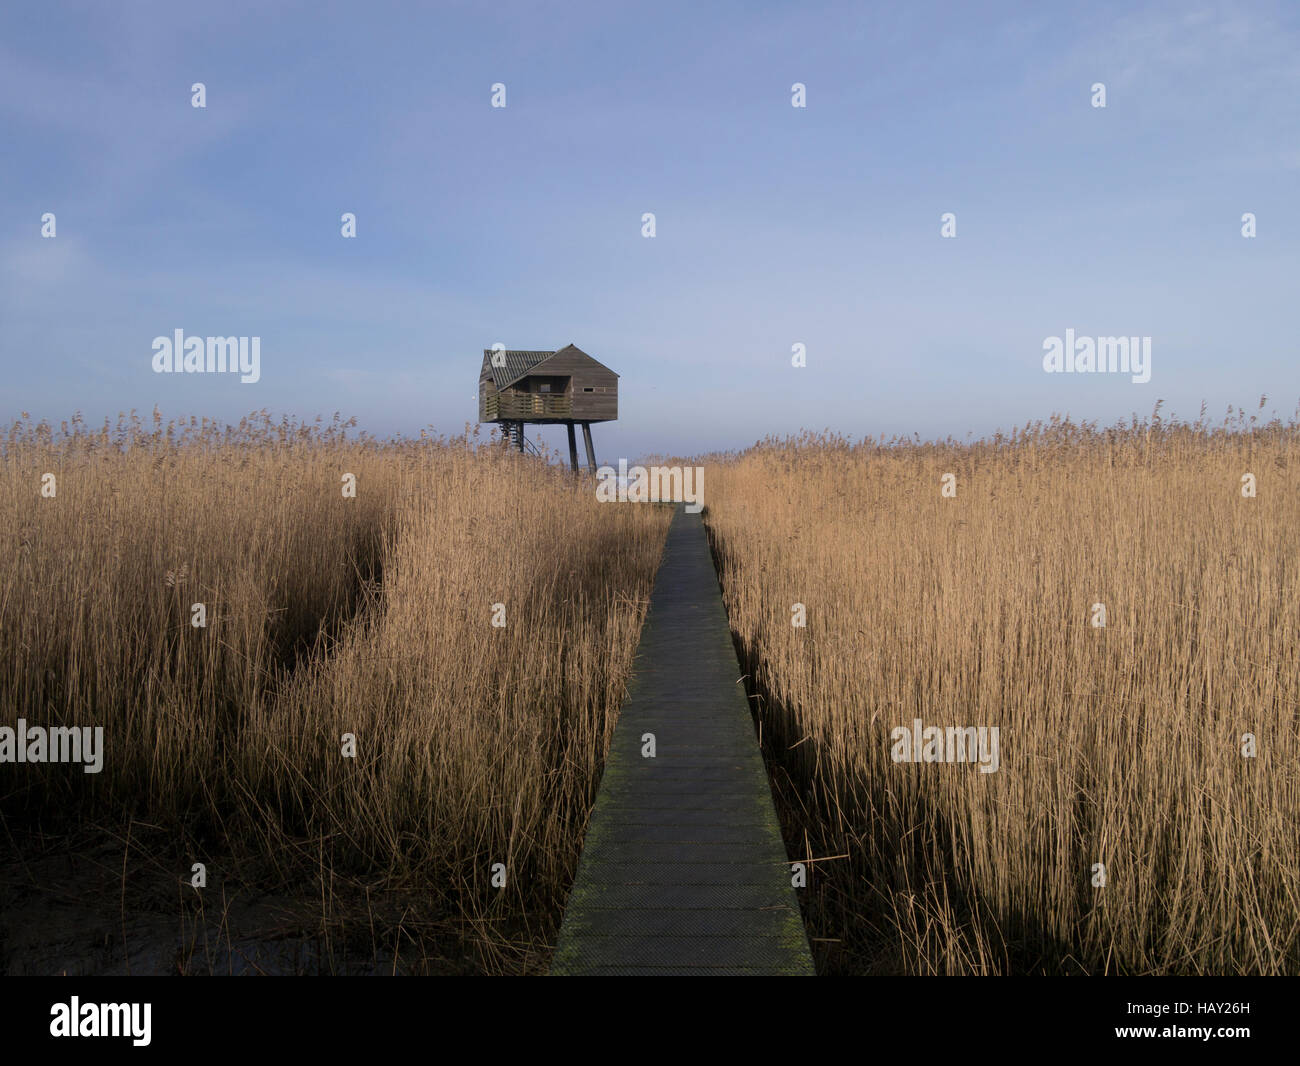 A wooden bird hide on stilts rises above reed beds and tidal mudflats on the fringes of the Wadden Sea, the Netherlands. Stock Photo